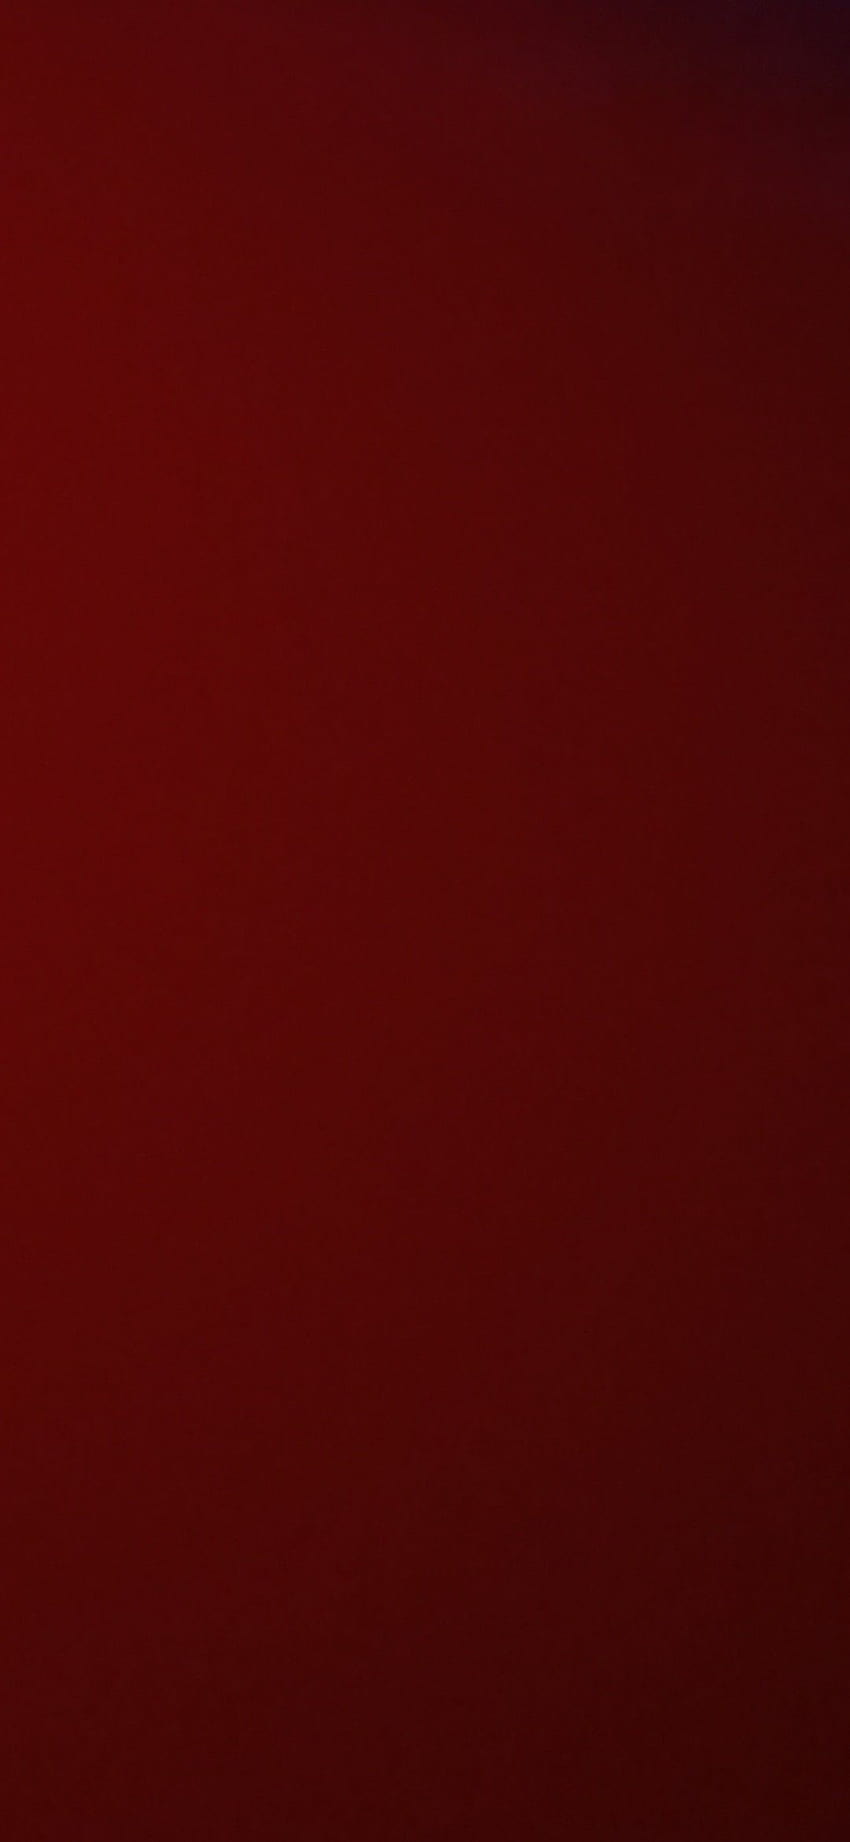 Solid Dark Red, pure red HD phone wallpaper